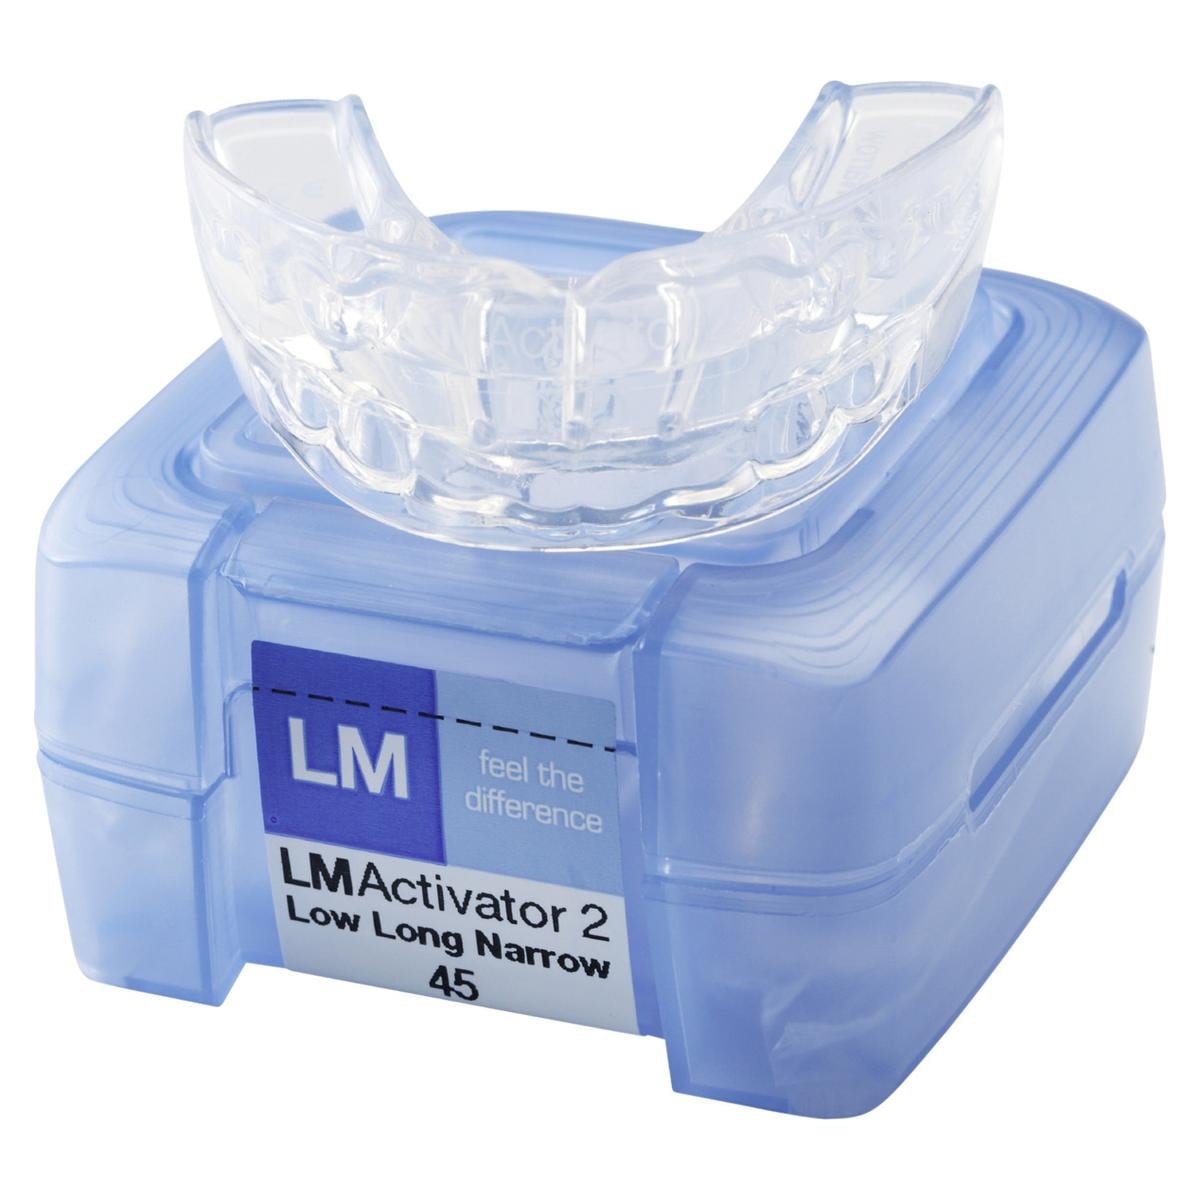 LM Activator 2 Low Long - Narrow - Size 35 (94235LLN)